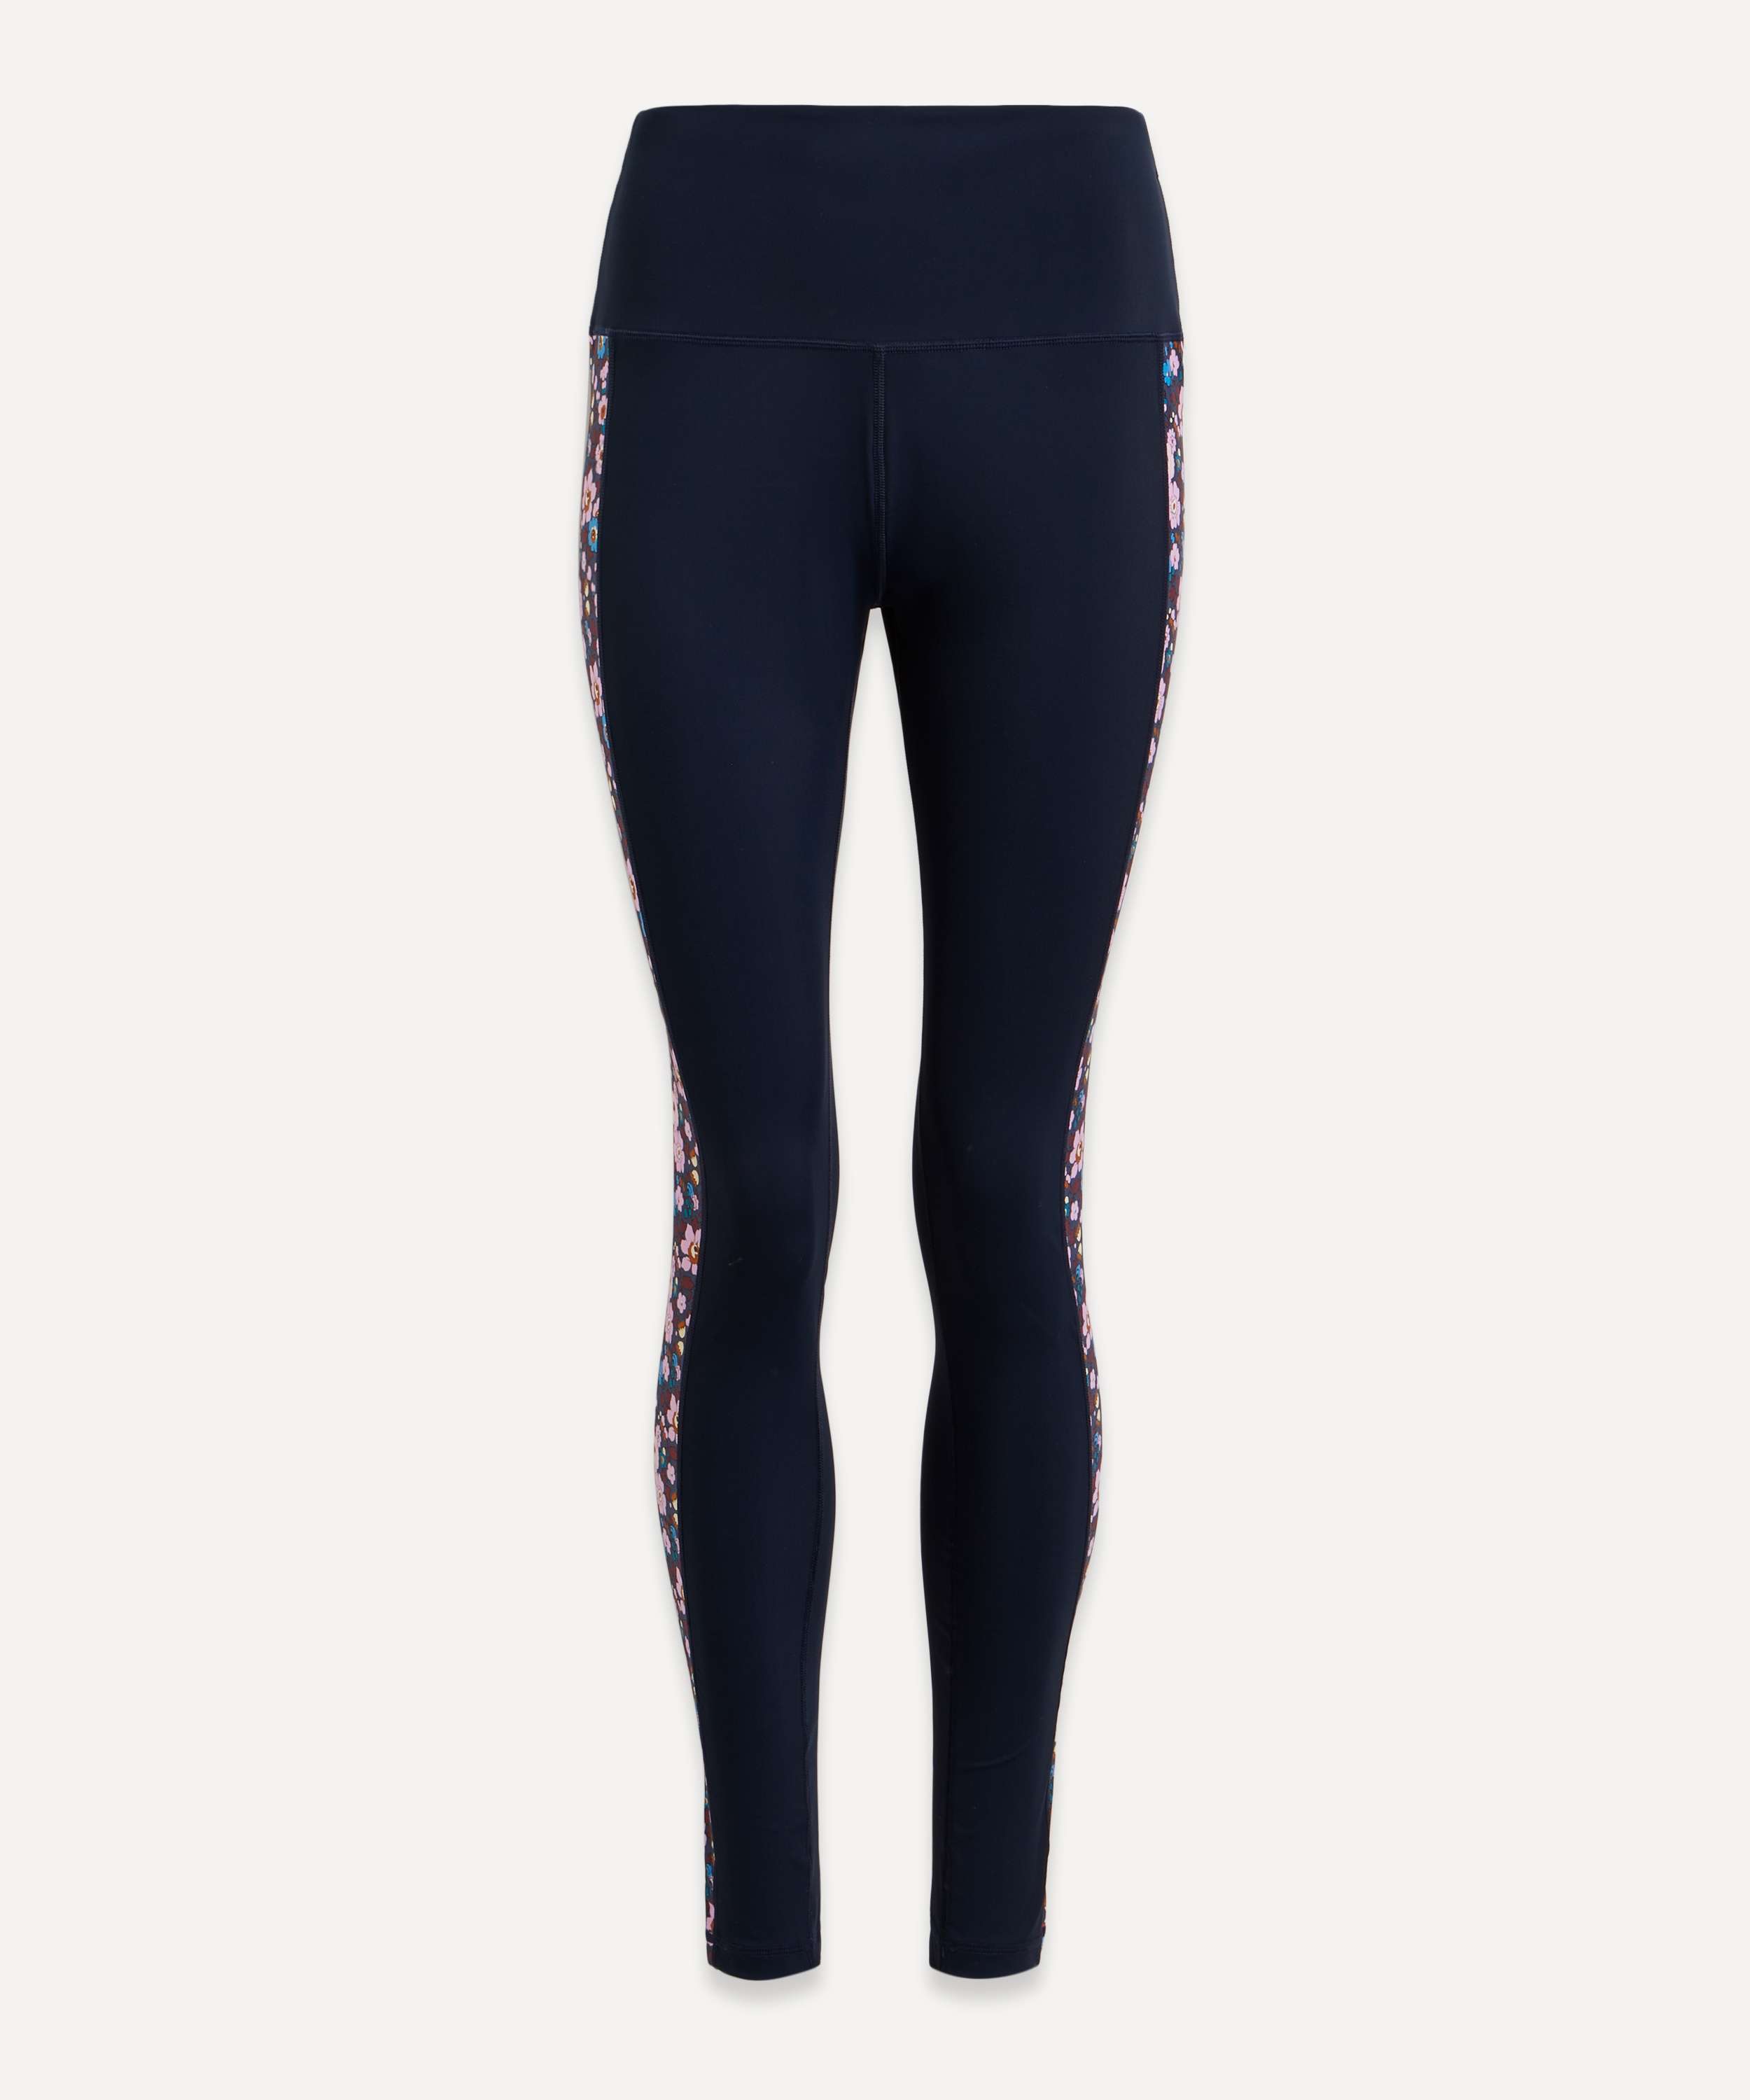 Pop Fit Stella Mid Rise Navy Blue Workout Leggings with Side Pockets